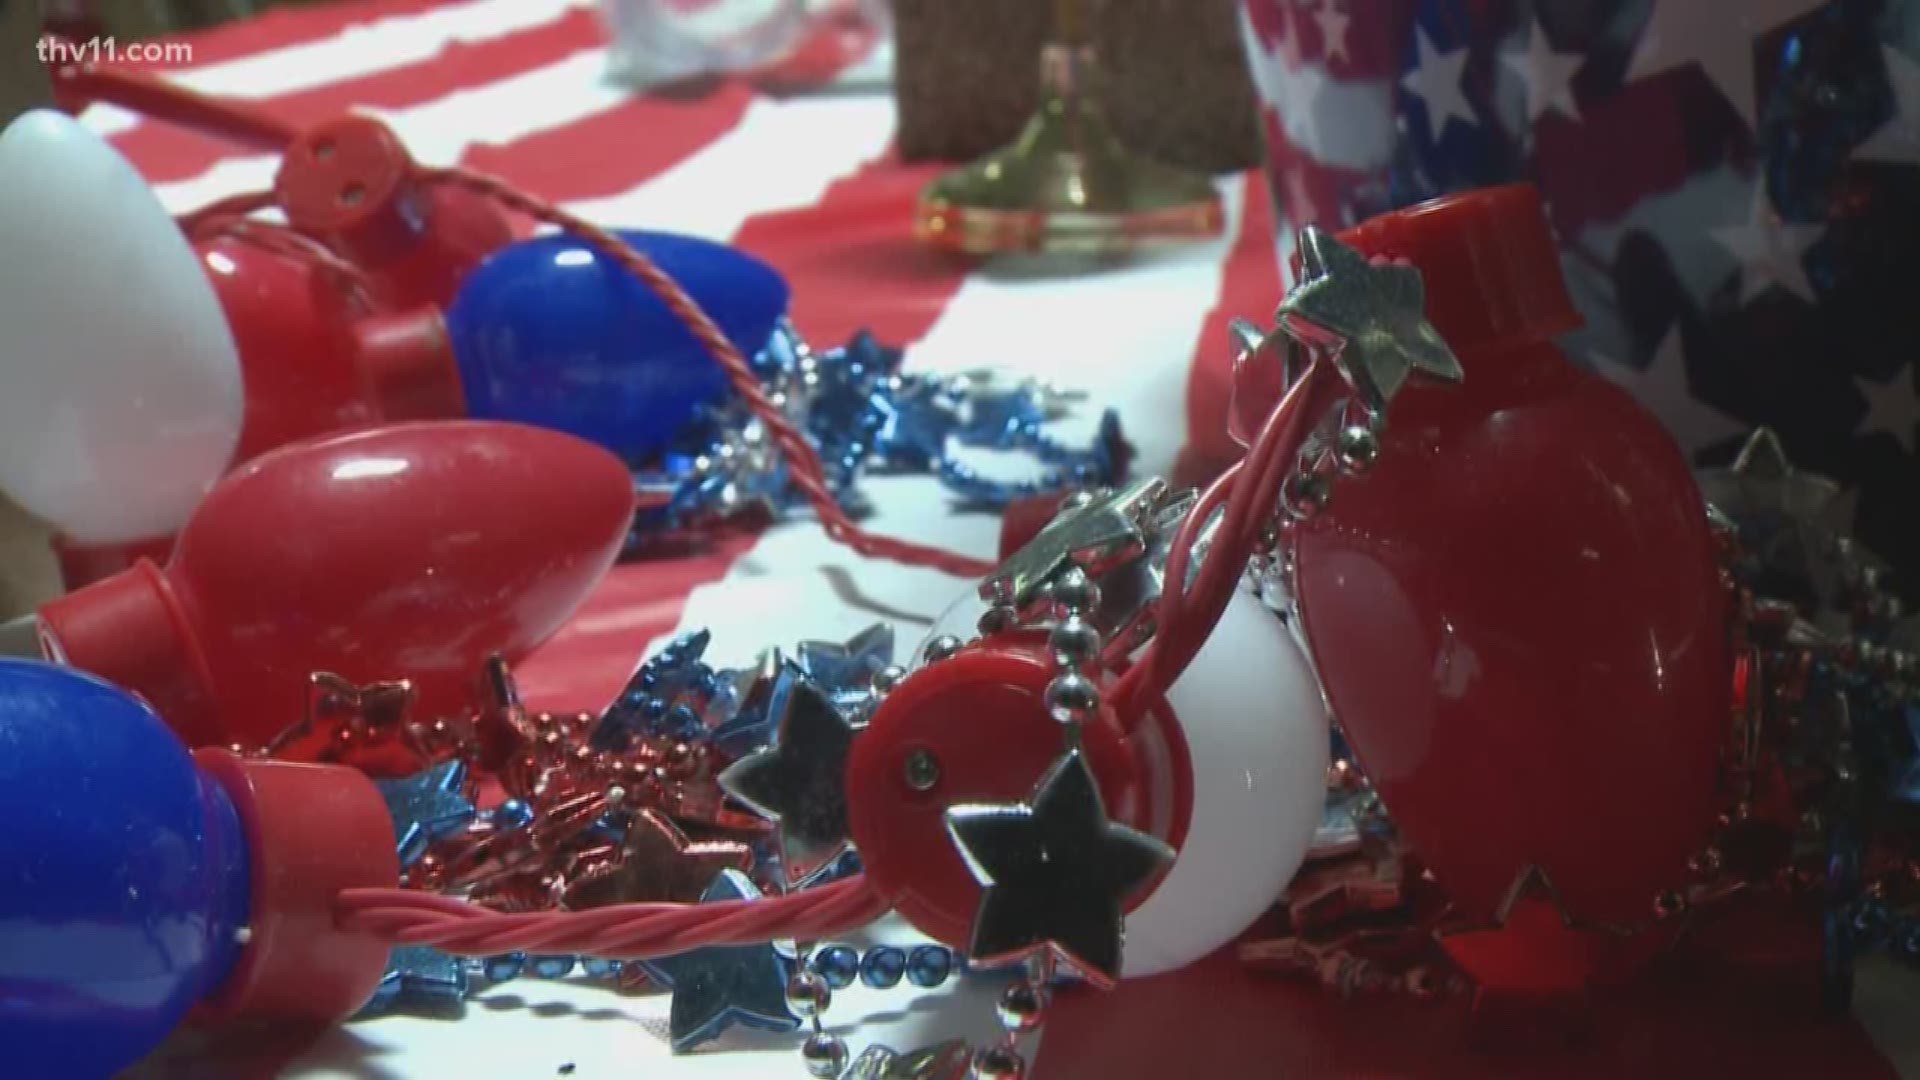 If your holiday plans include popping off some fireworks, keep in mind they can be dangerous.